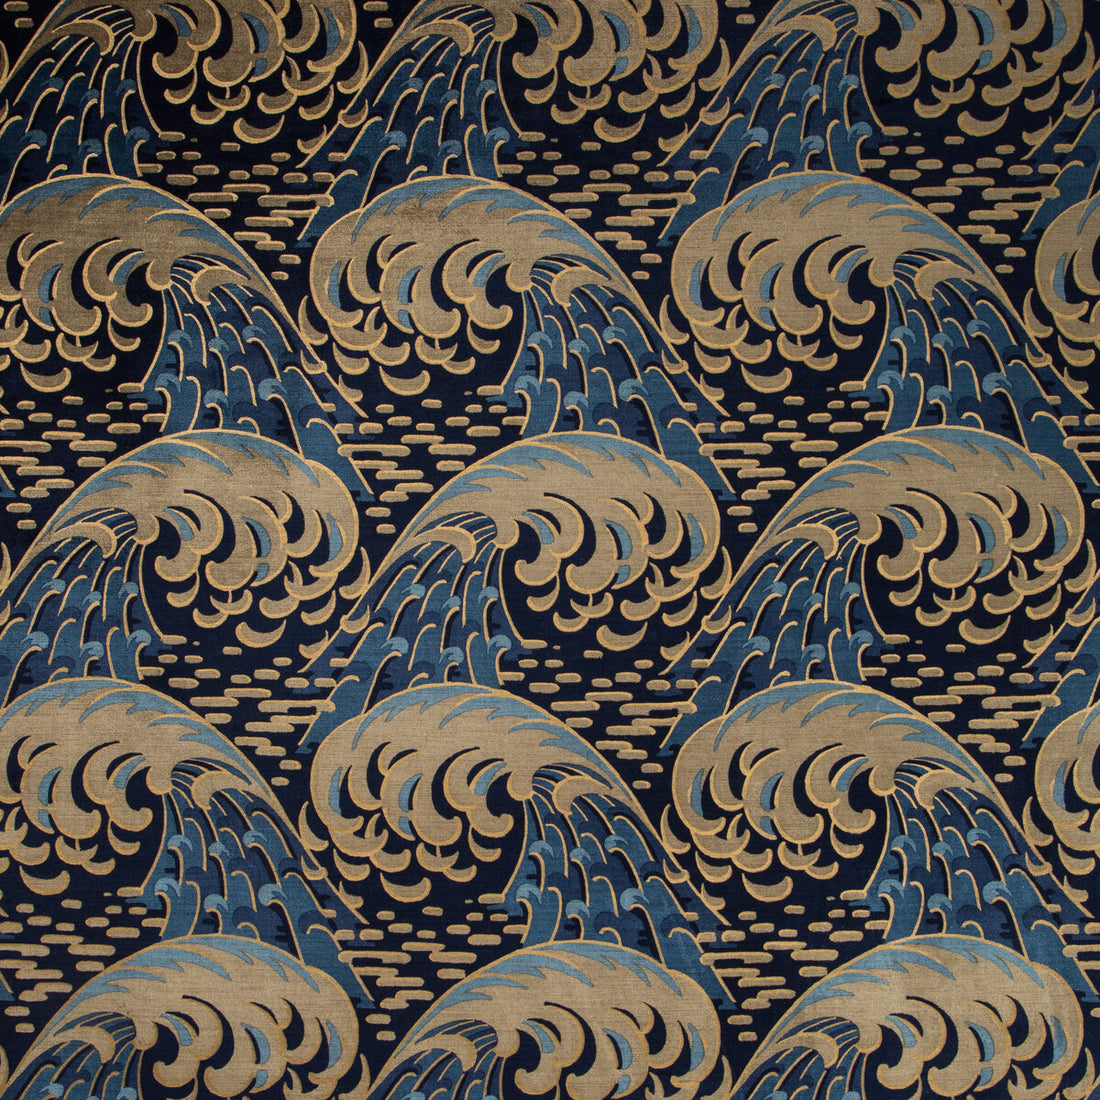 Kaiyou fabric in indigo color - pattern 35419.516.0 - by Kravet Couture in the Izu Collection collection